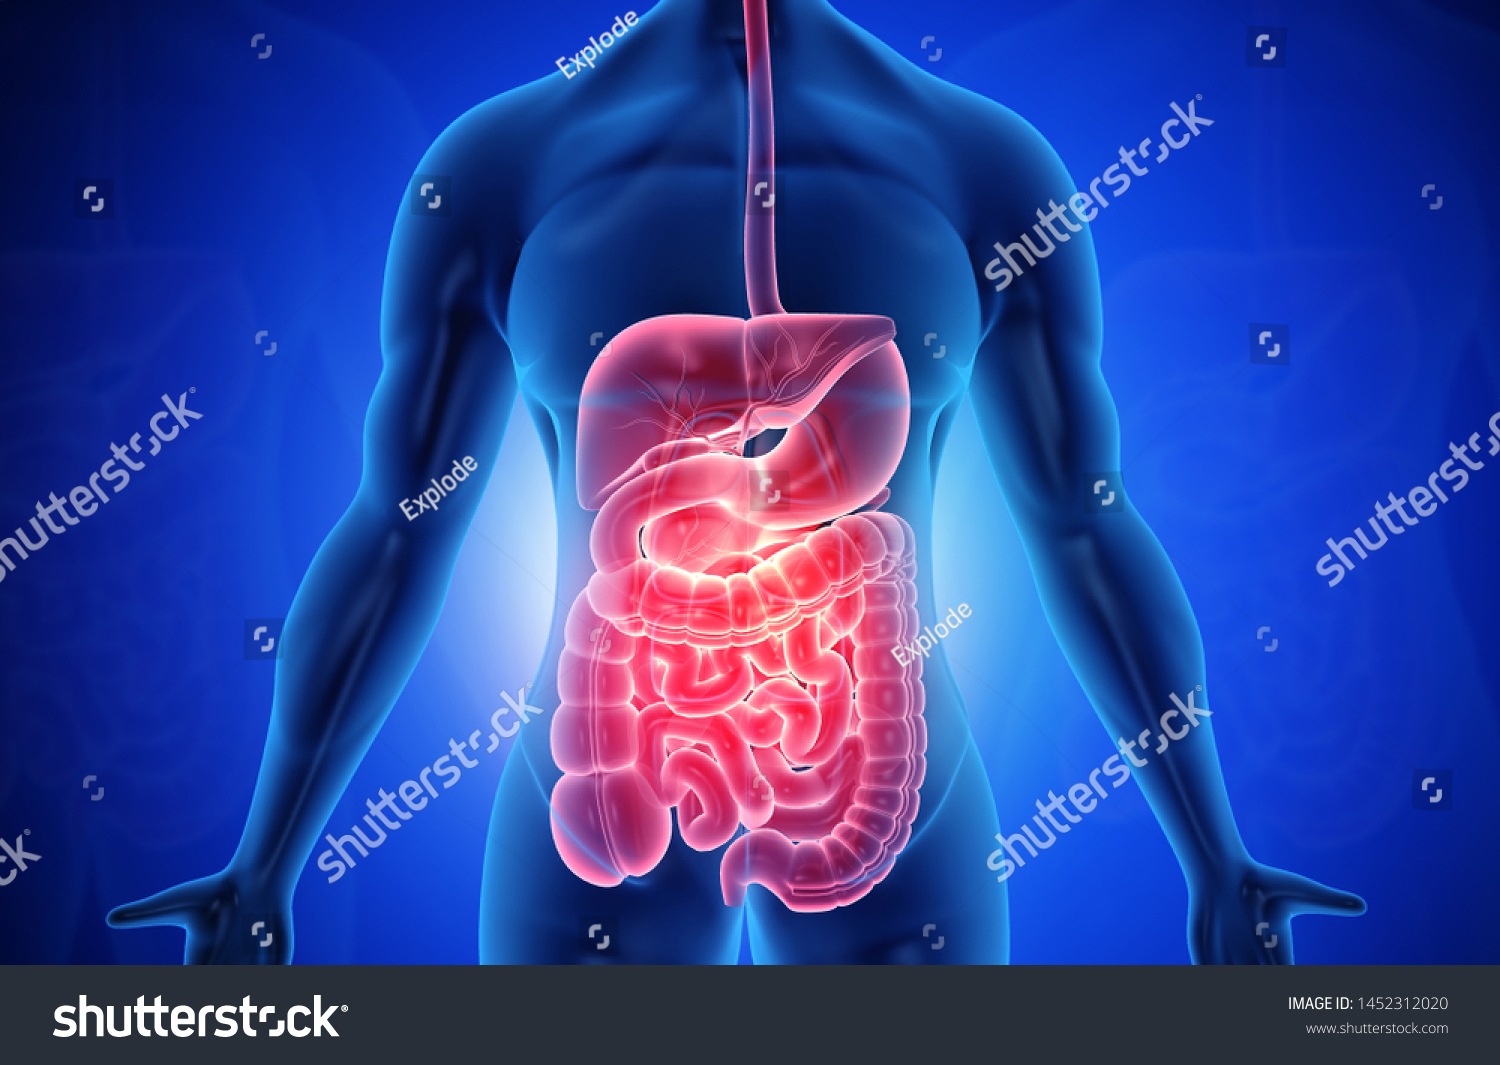 the digestive and excretory systems - Class 11 - Quizizz